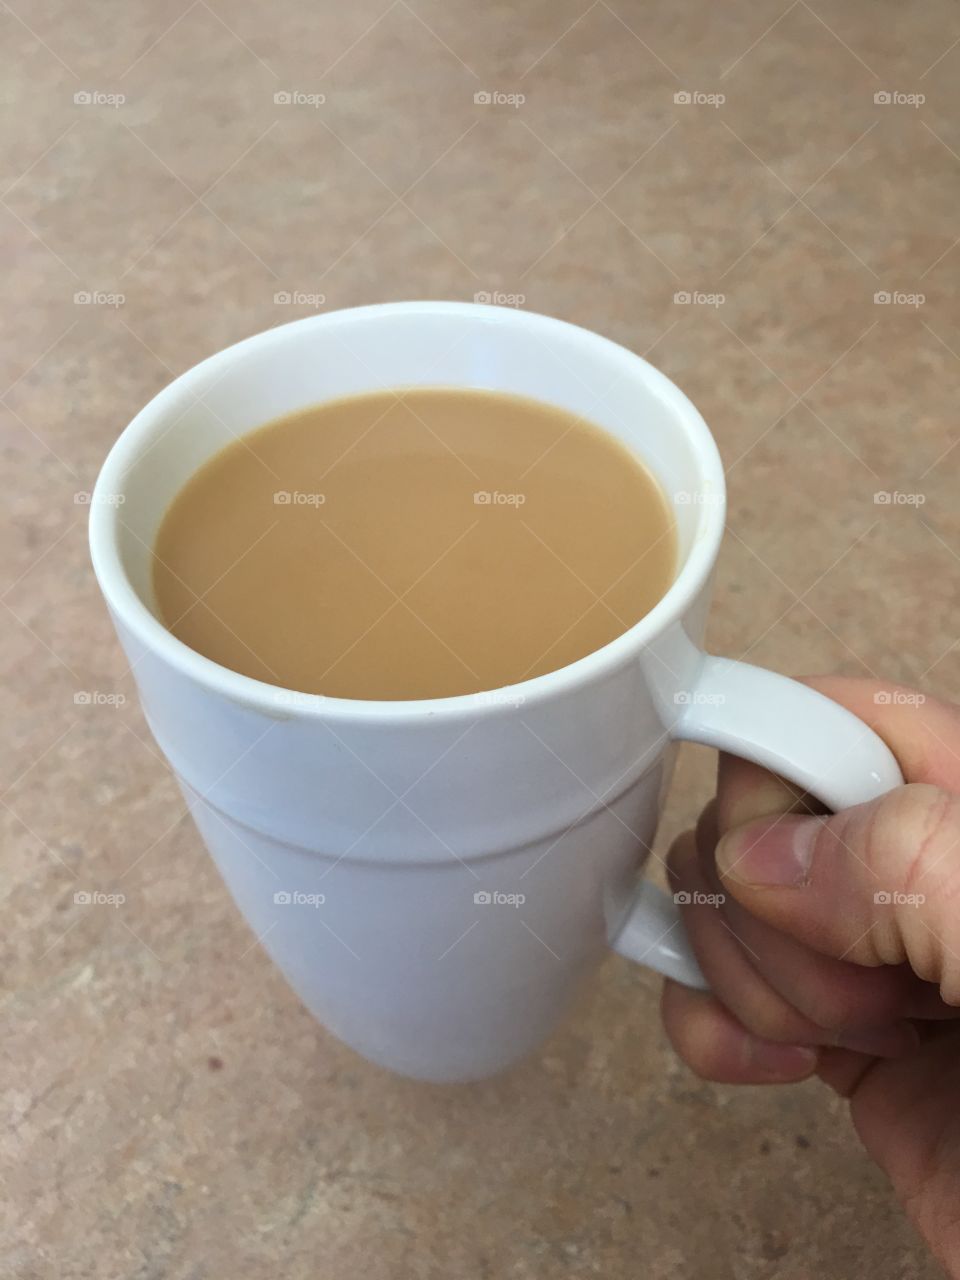 Hand holding a cup of coffee.